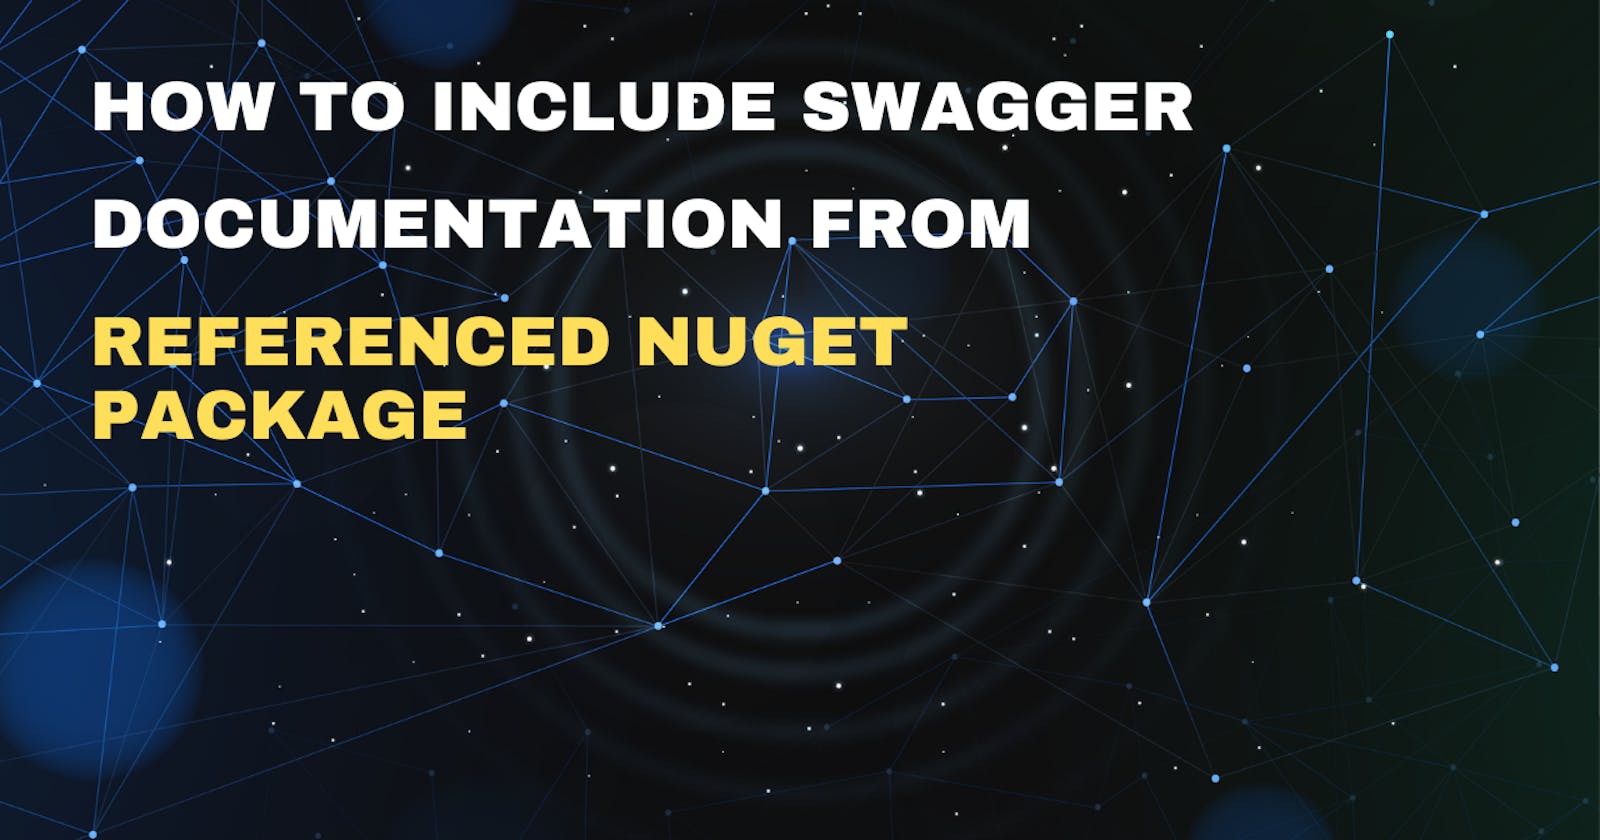 How to include Swagger documentation from referenced nuget package